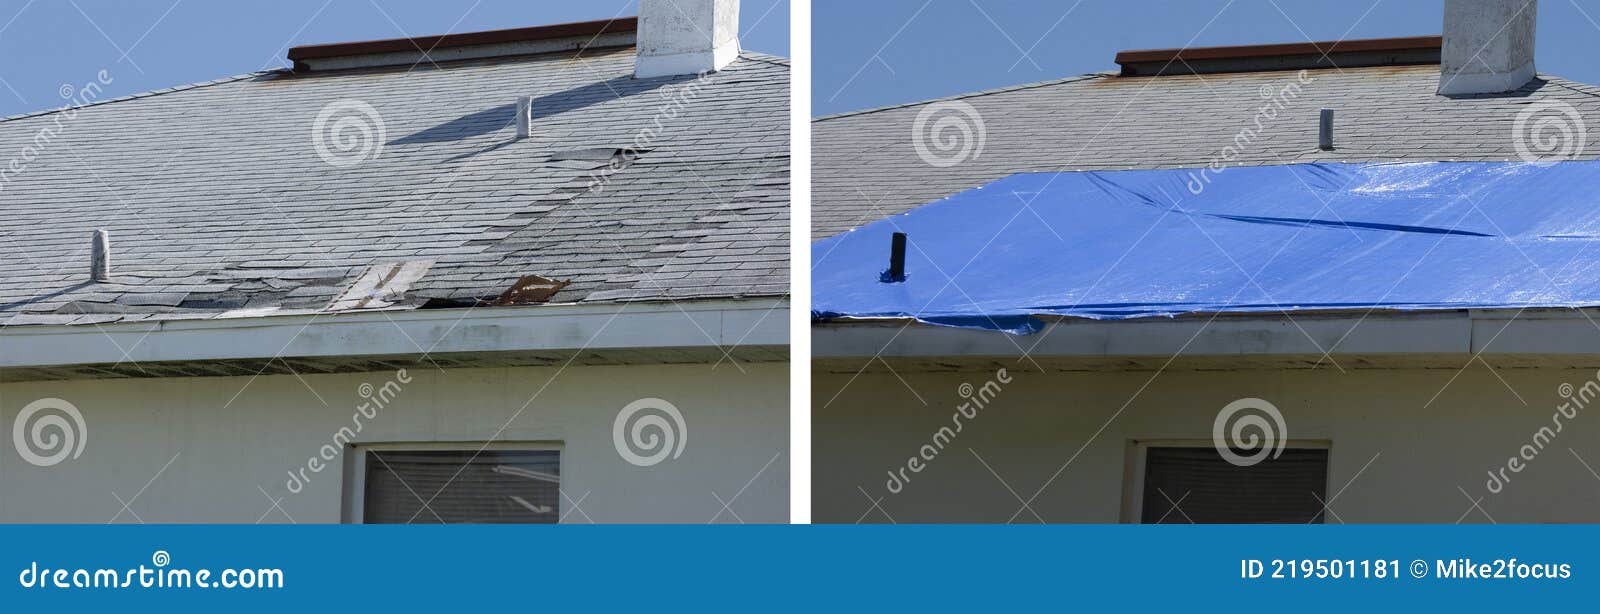 before and after temporary repair on a badly storm damaged roof on a house with a big leaky hole in the rooftop